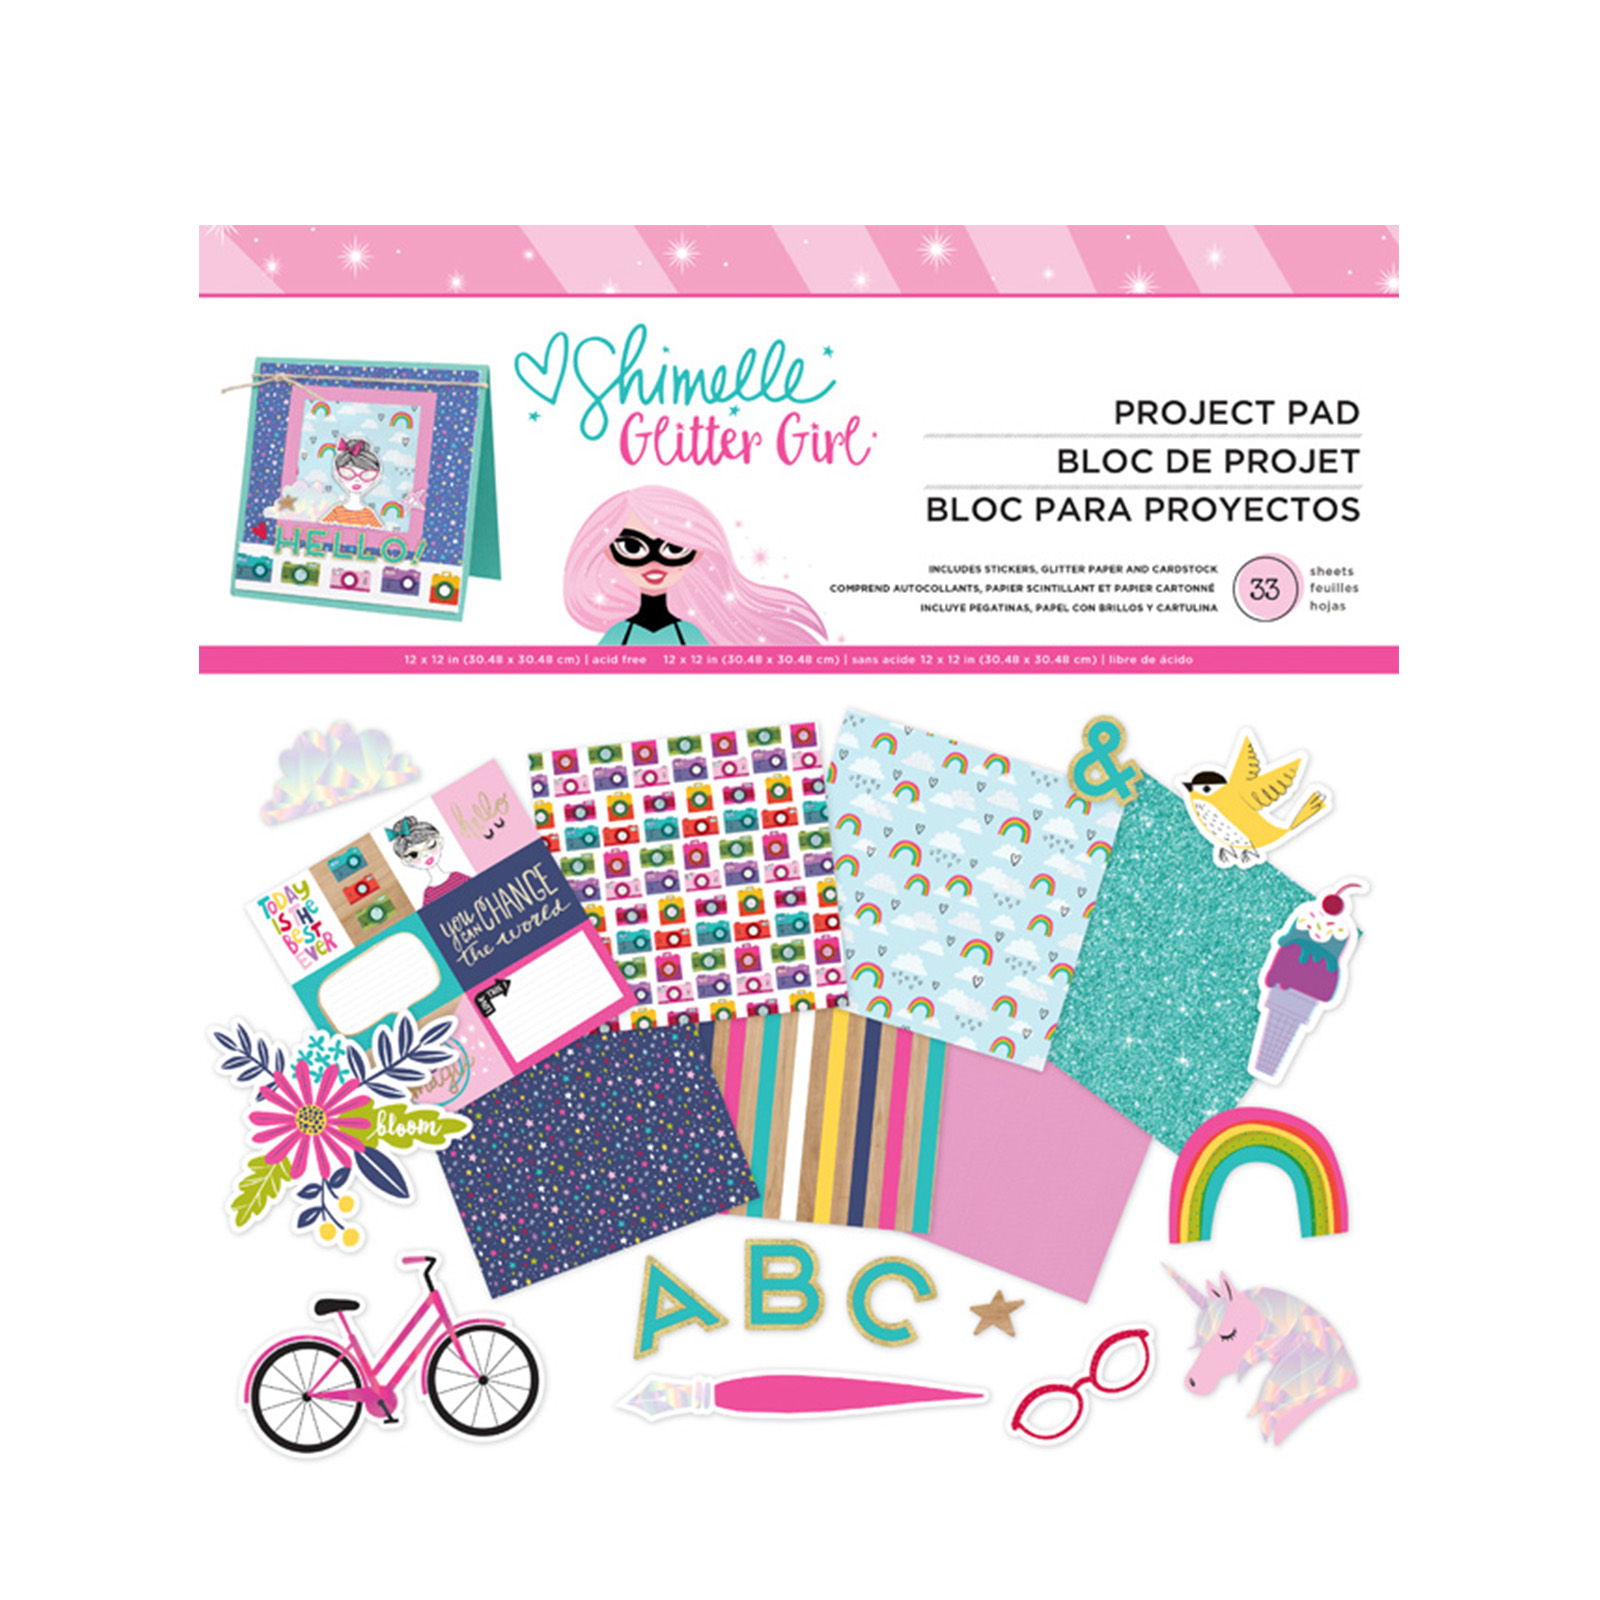 American Crafts • Shimelle paper pad kit 33 sheets